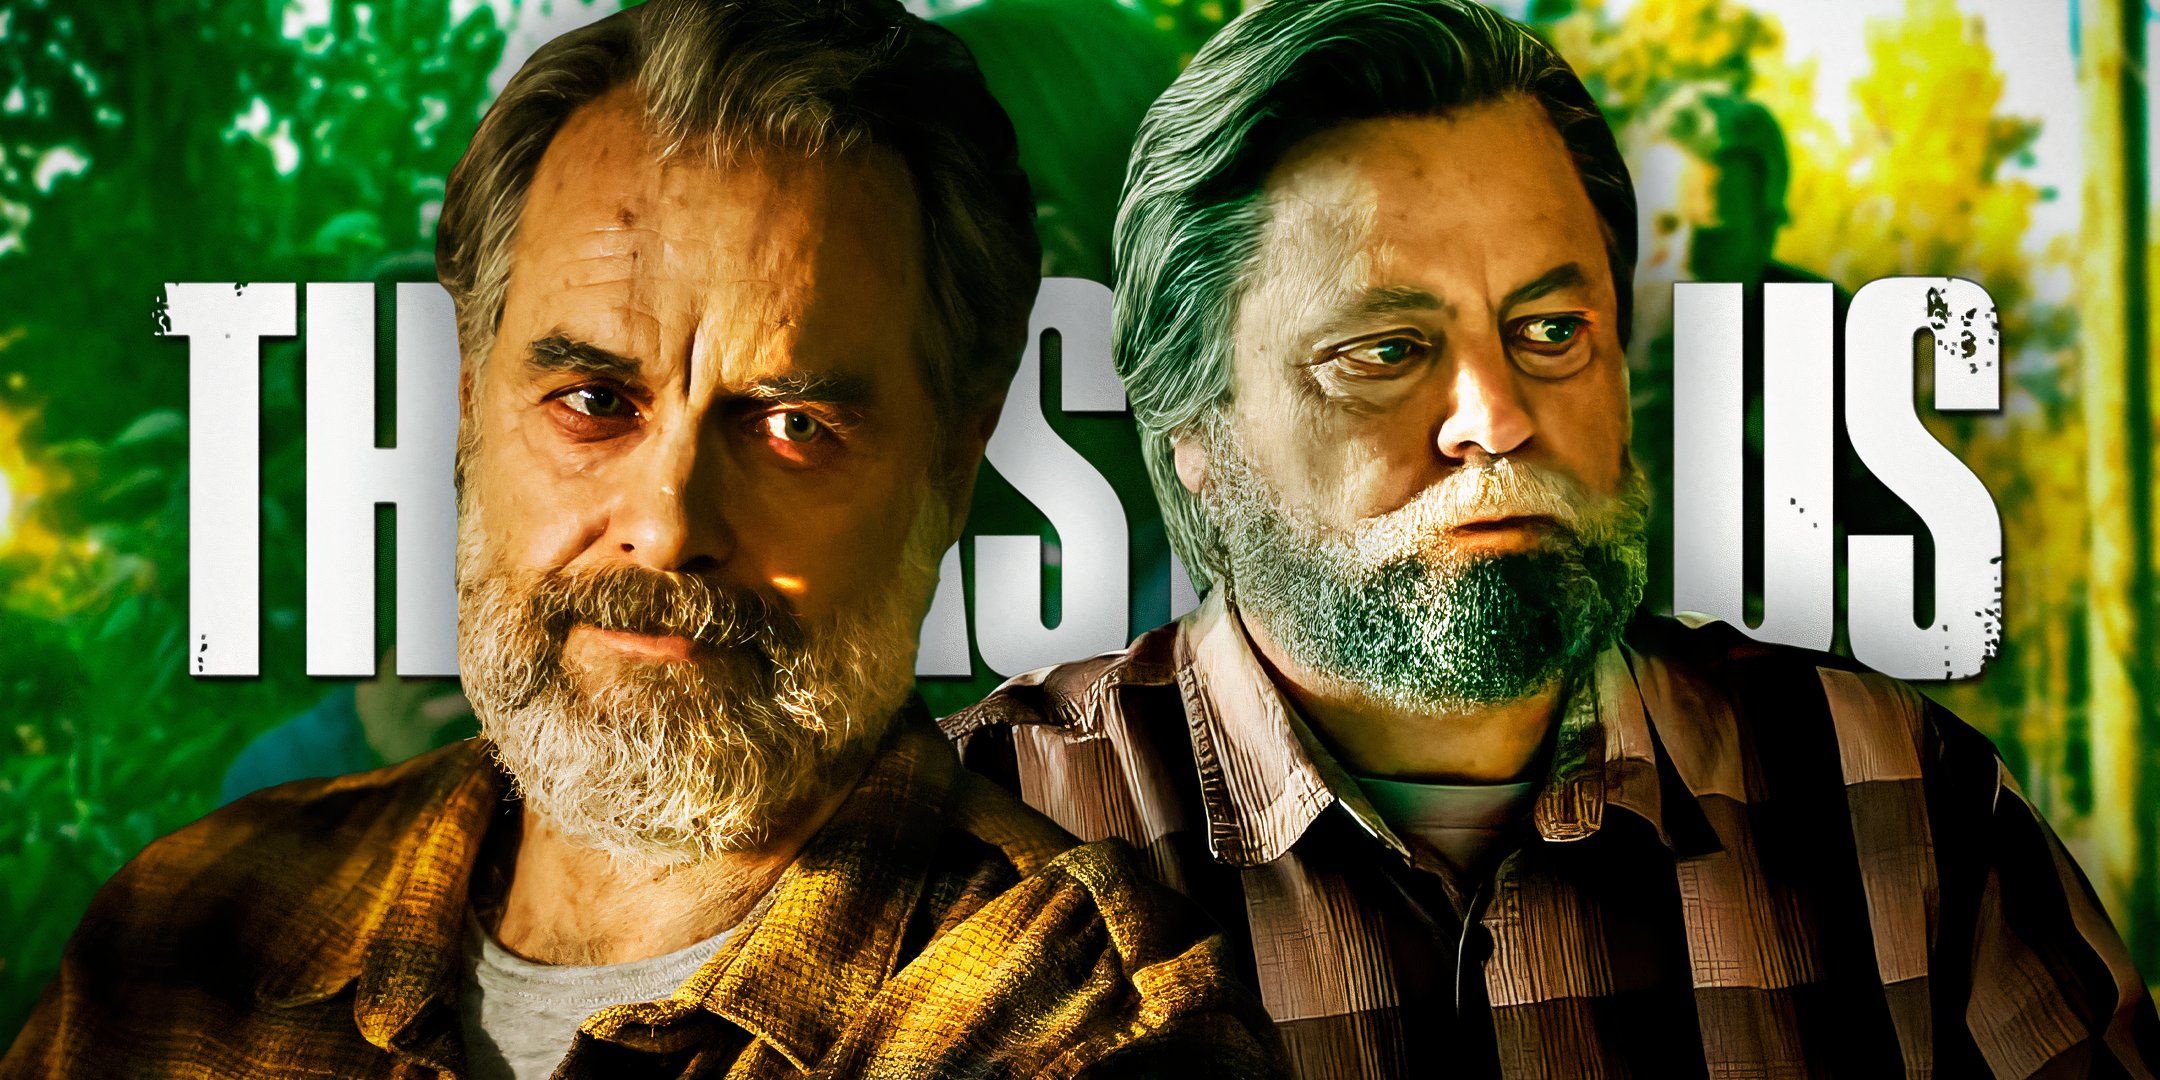 Bill (Nick Offerman) and Frank (Murray Bartlett) from HBO's The Last of Us